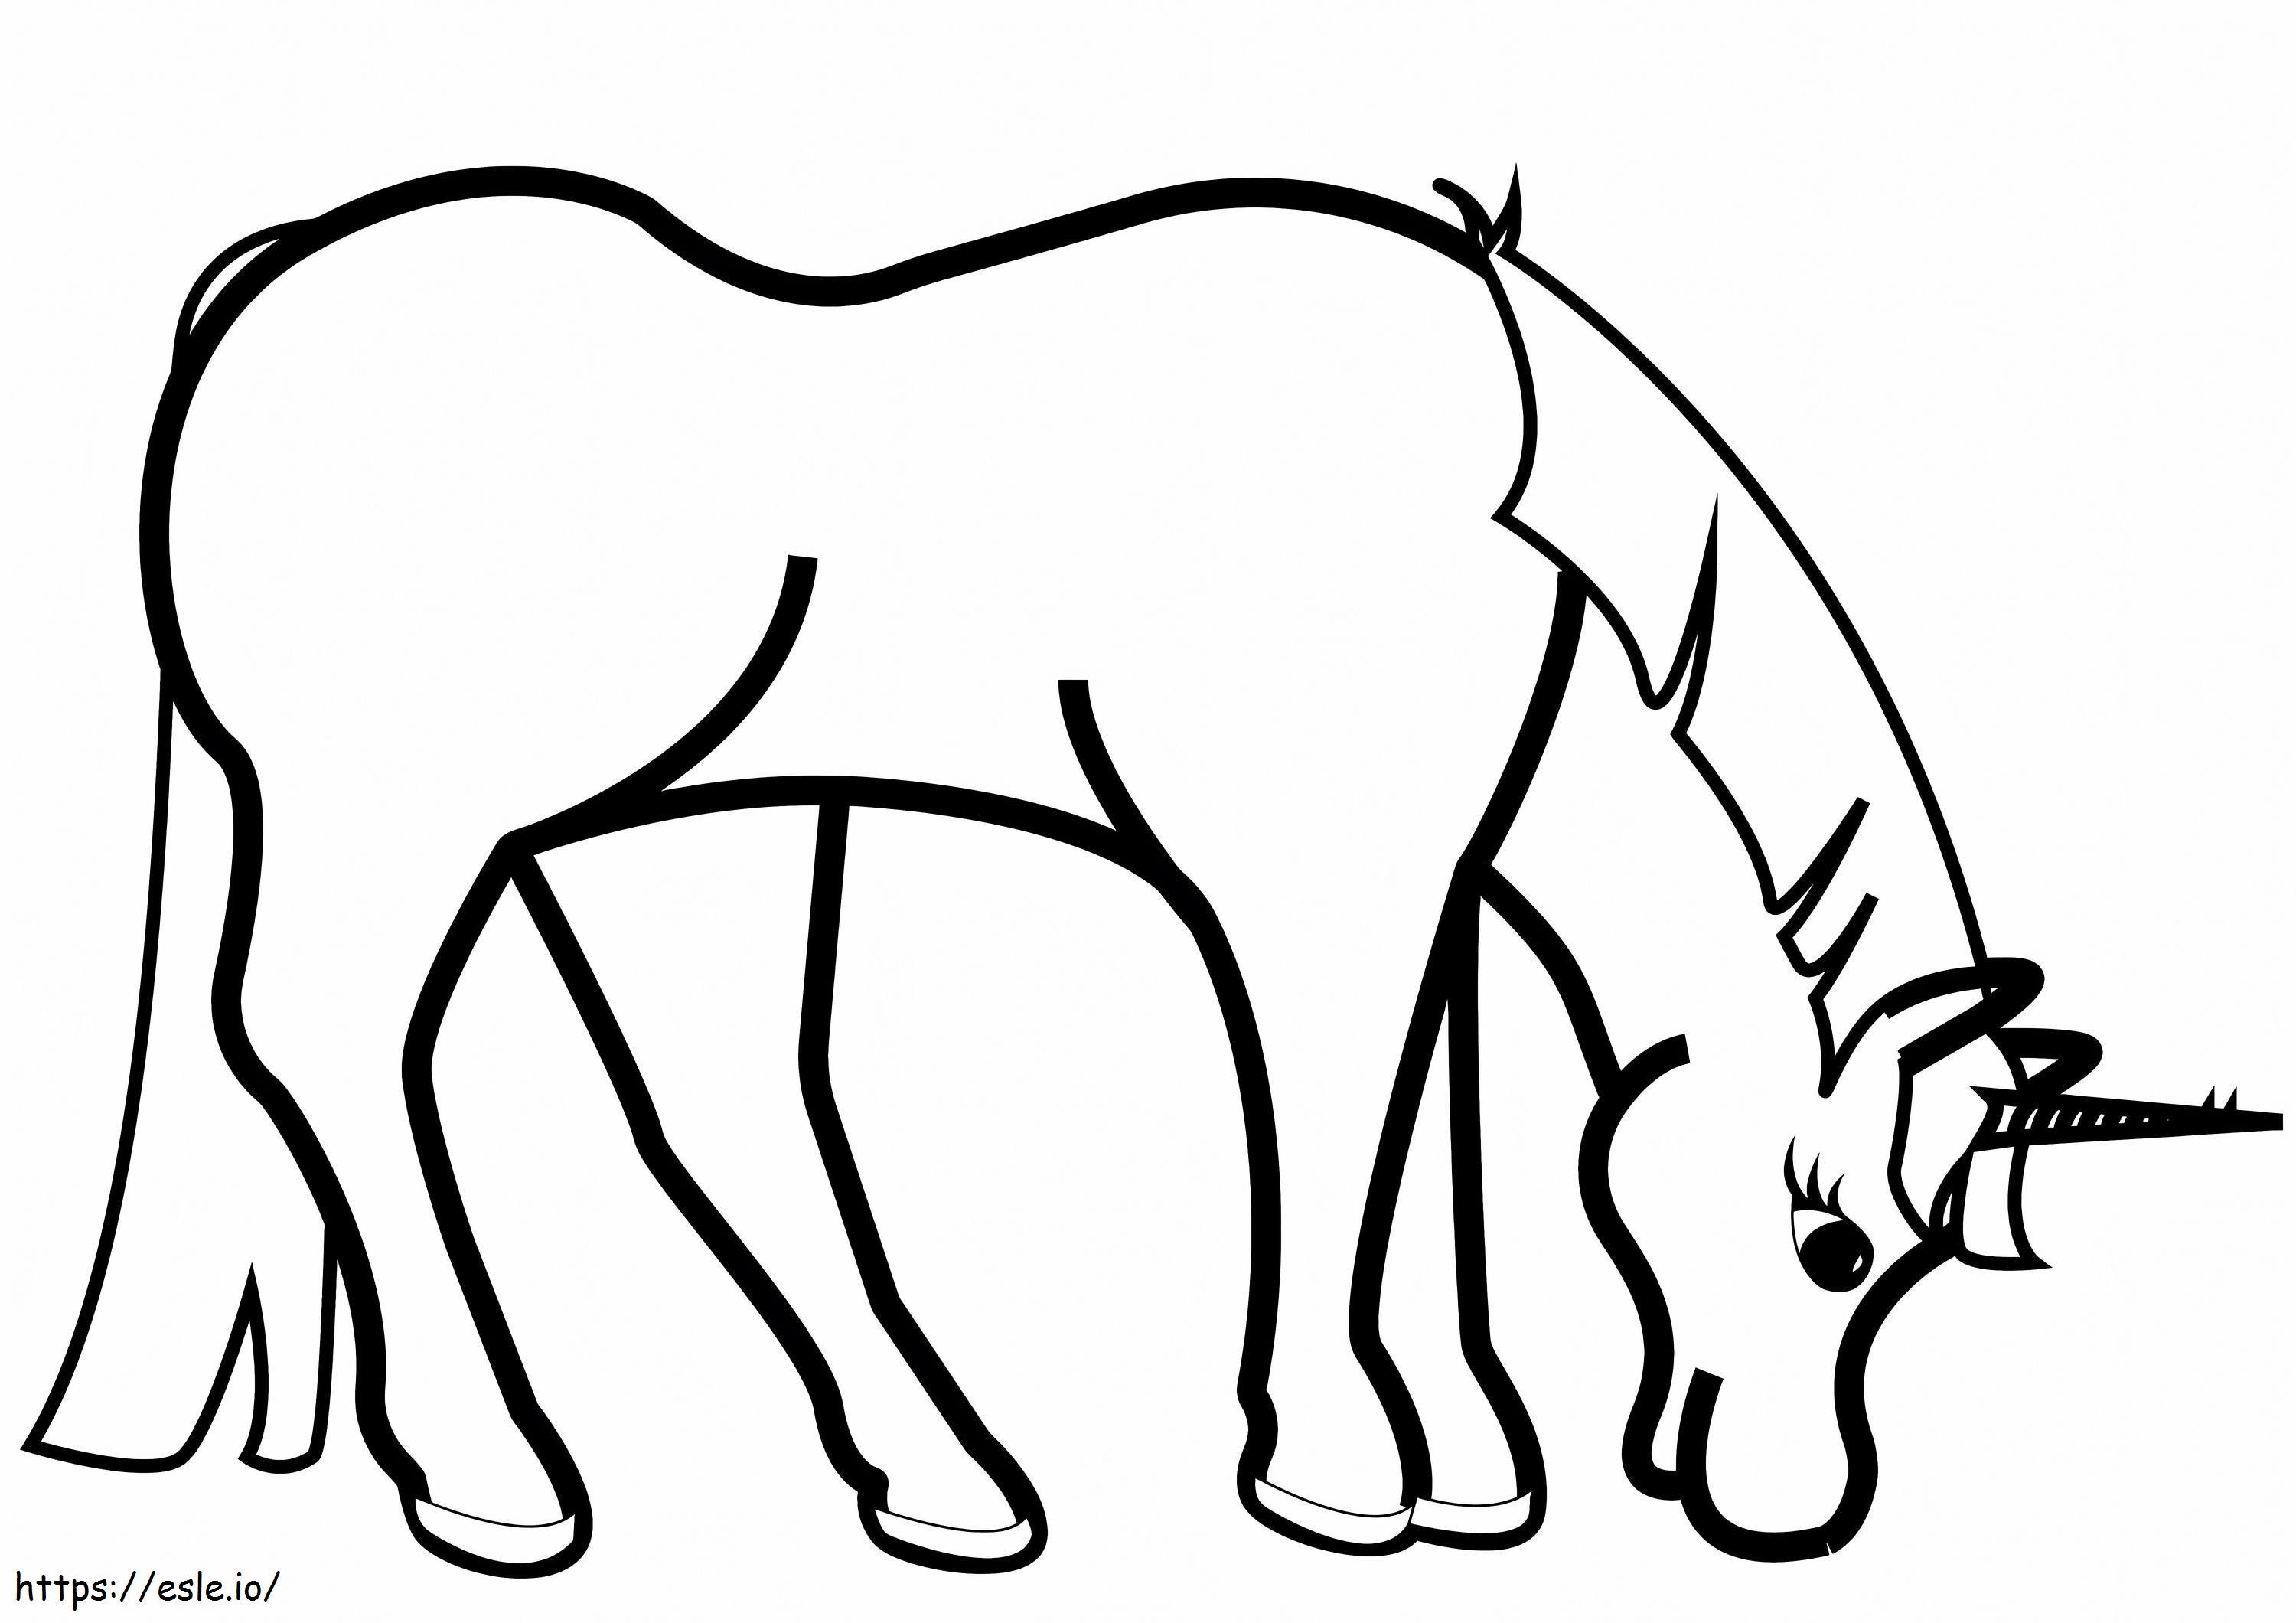 1576117412 Grazing Unicorn coloring page